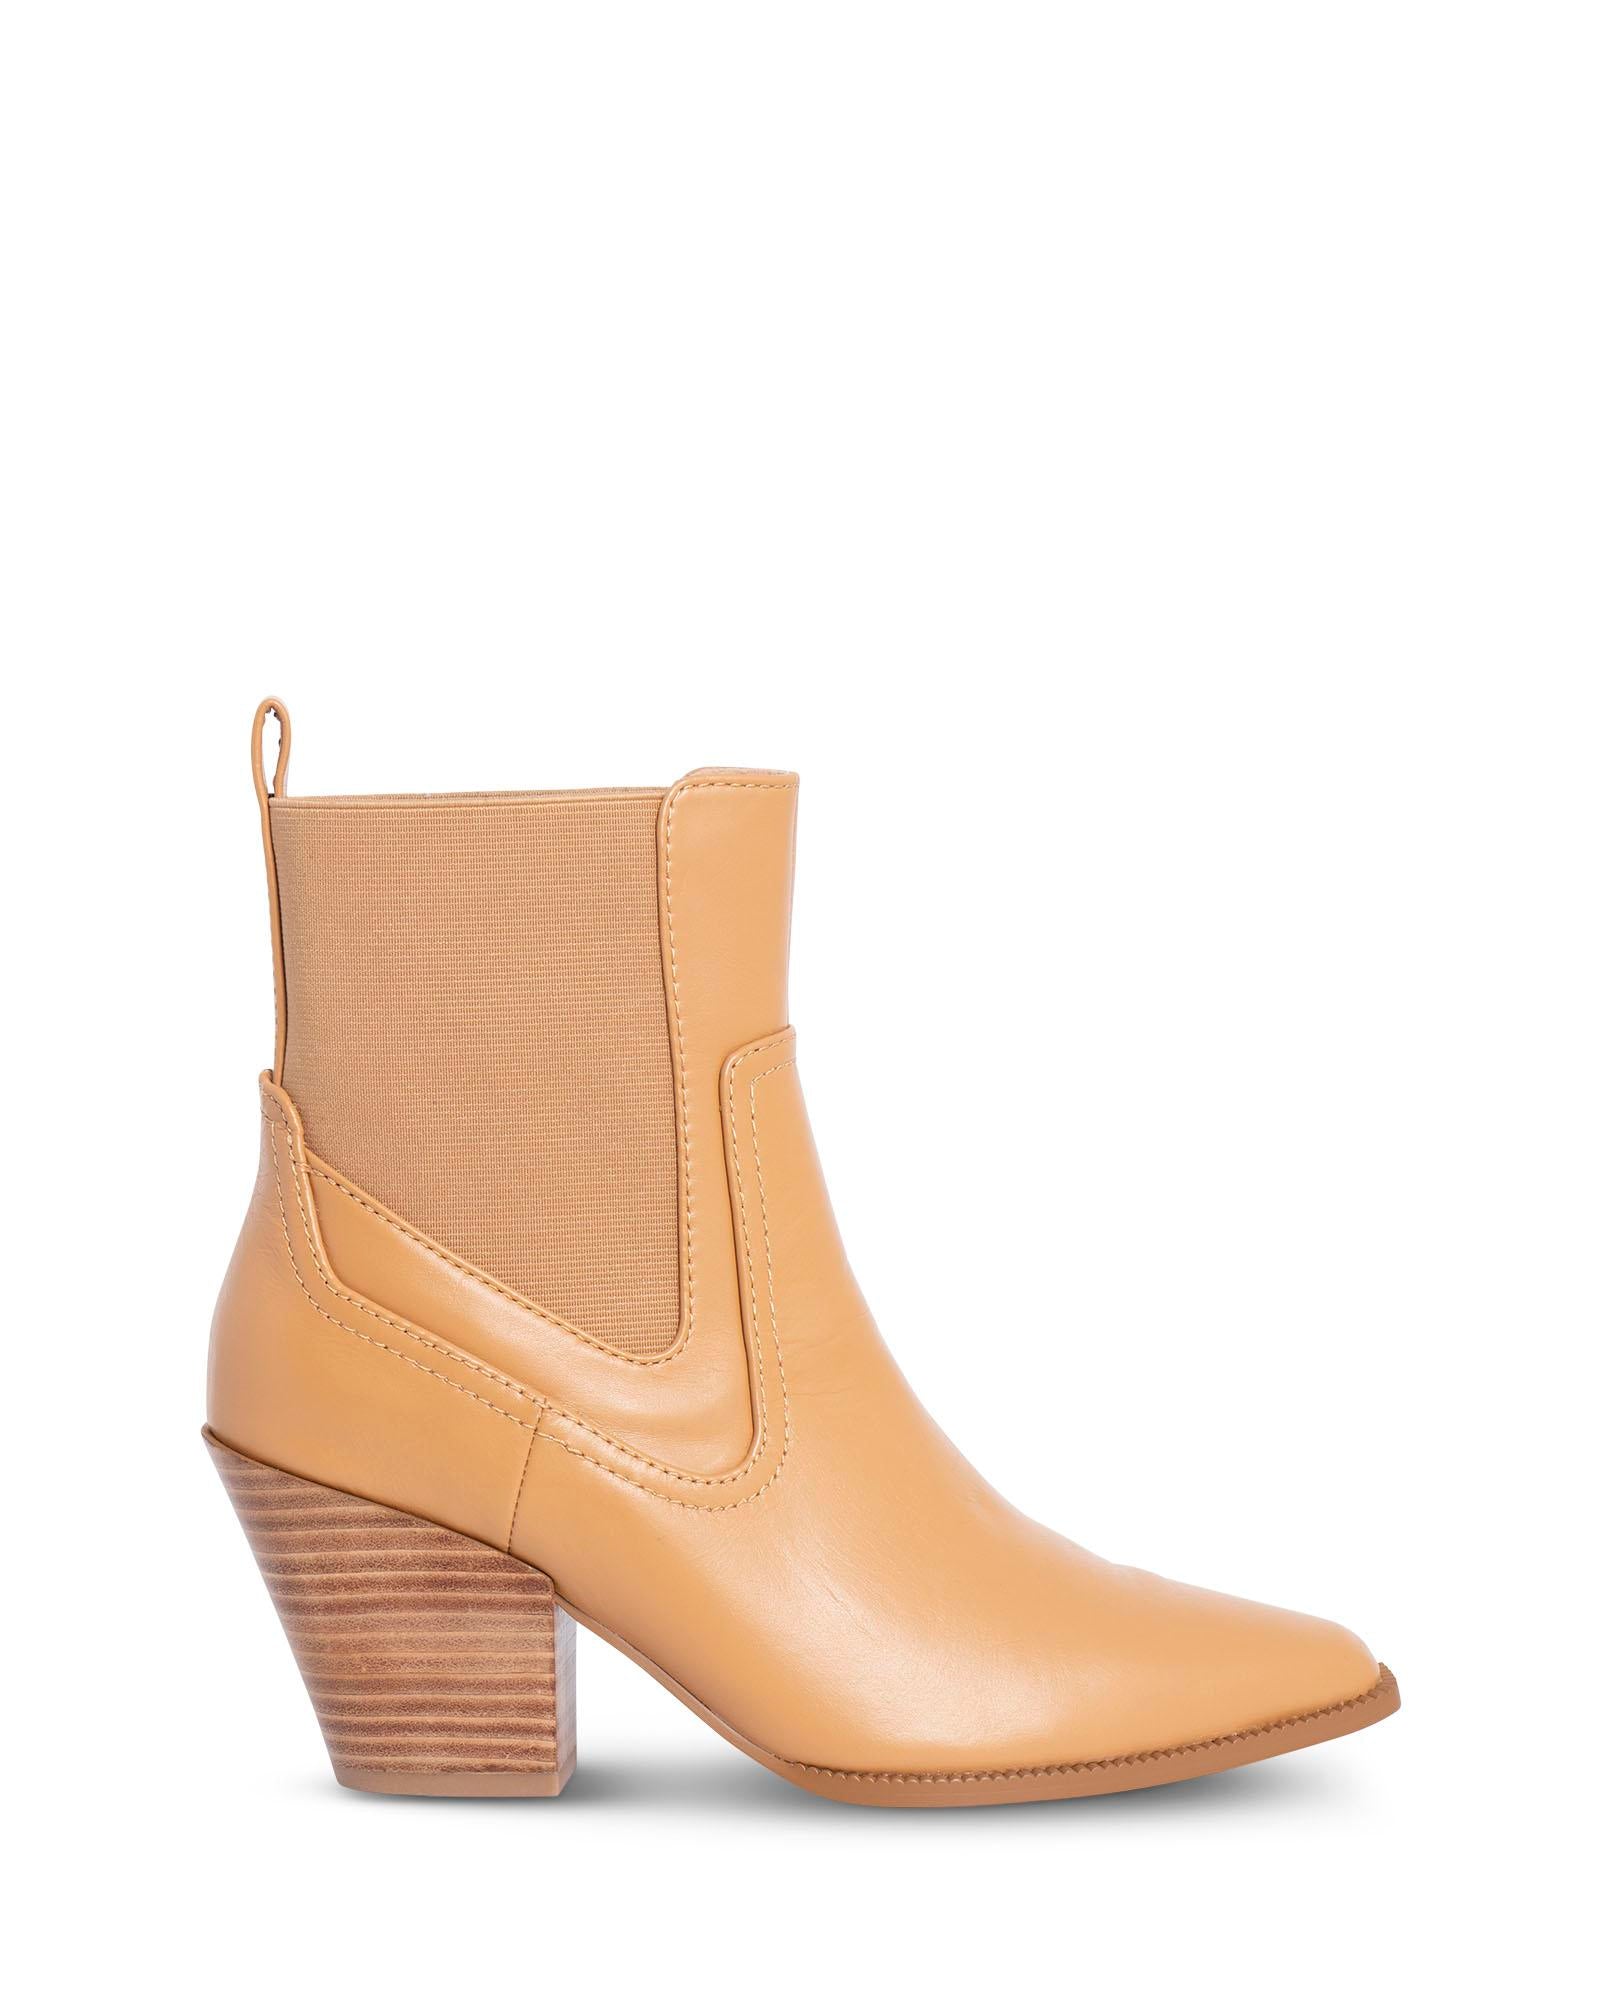 Norwich Tan 7cm Western Style Ankle Boot